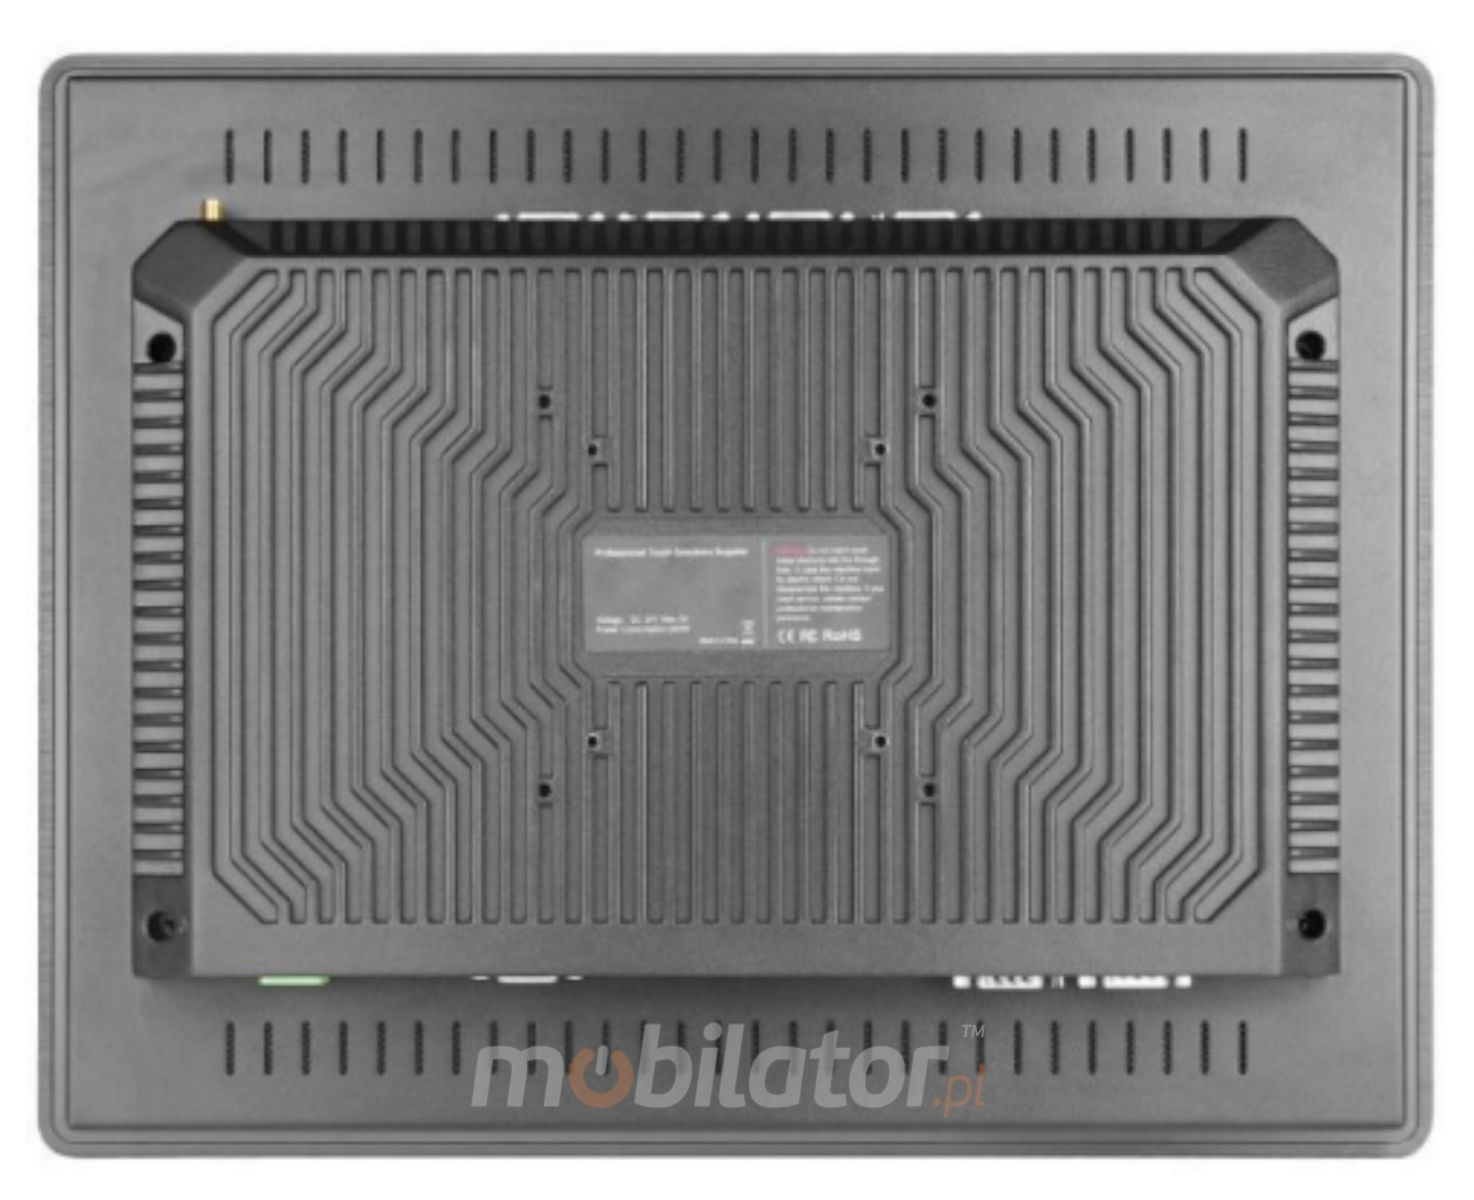 View of the back of the industrial panel BIBOX-150PC2